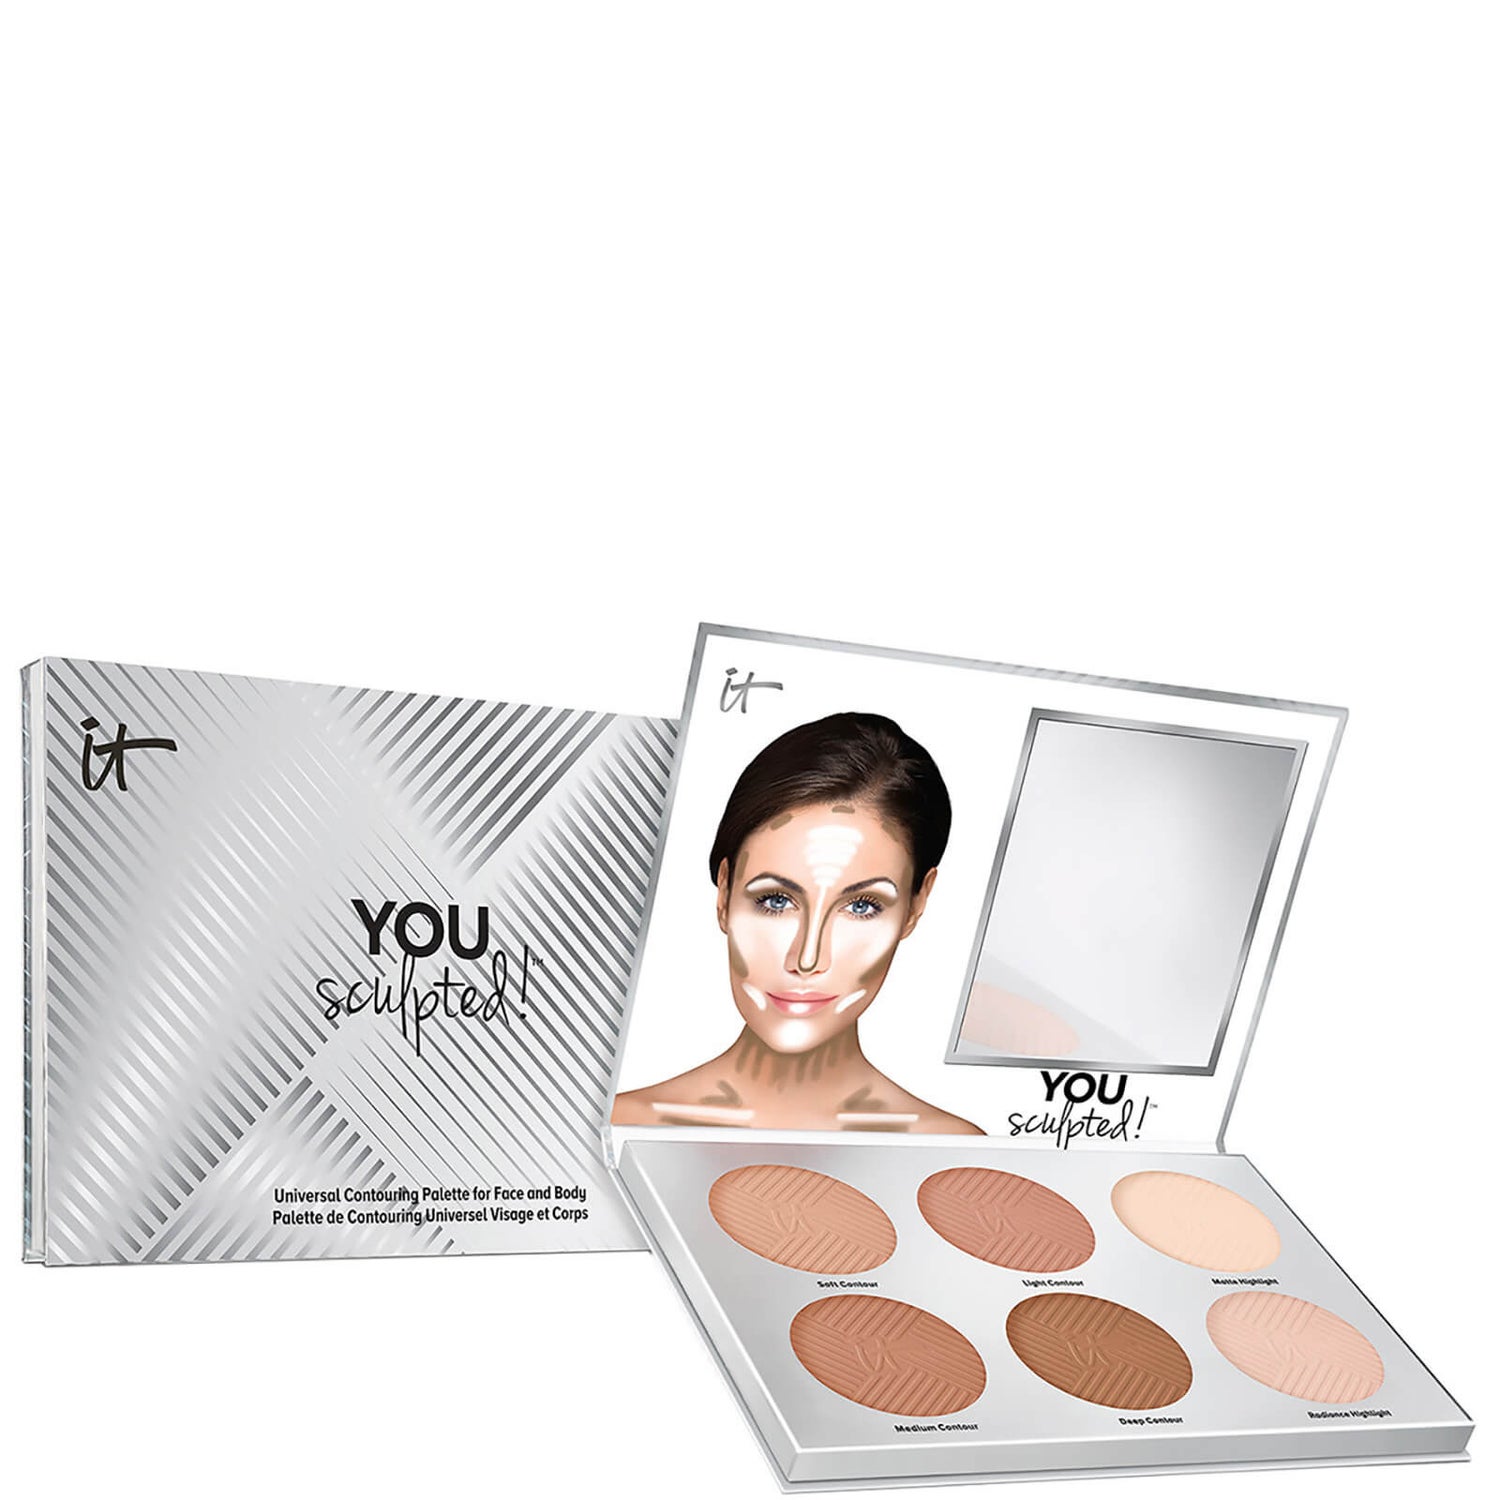 IT Cosmetics You Sculpted! Universal Contouring Palette for Face and Body